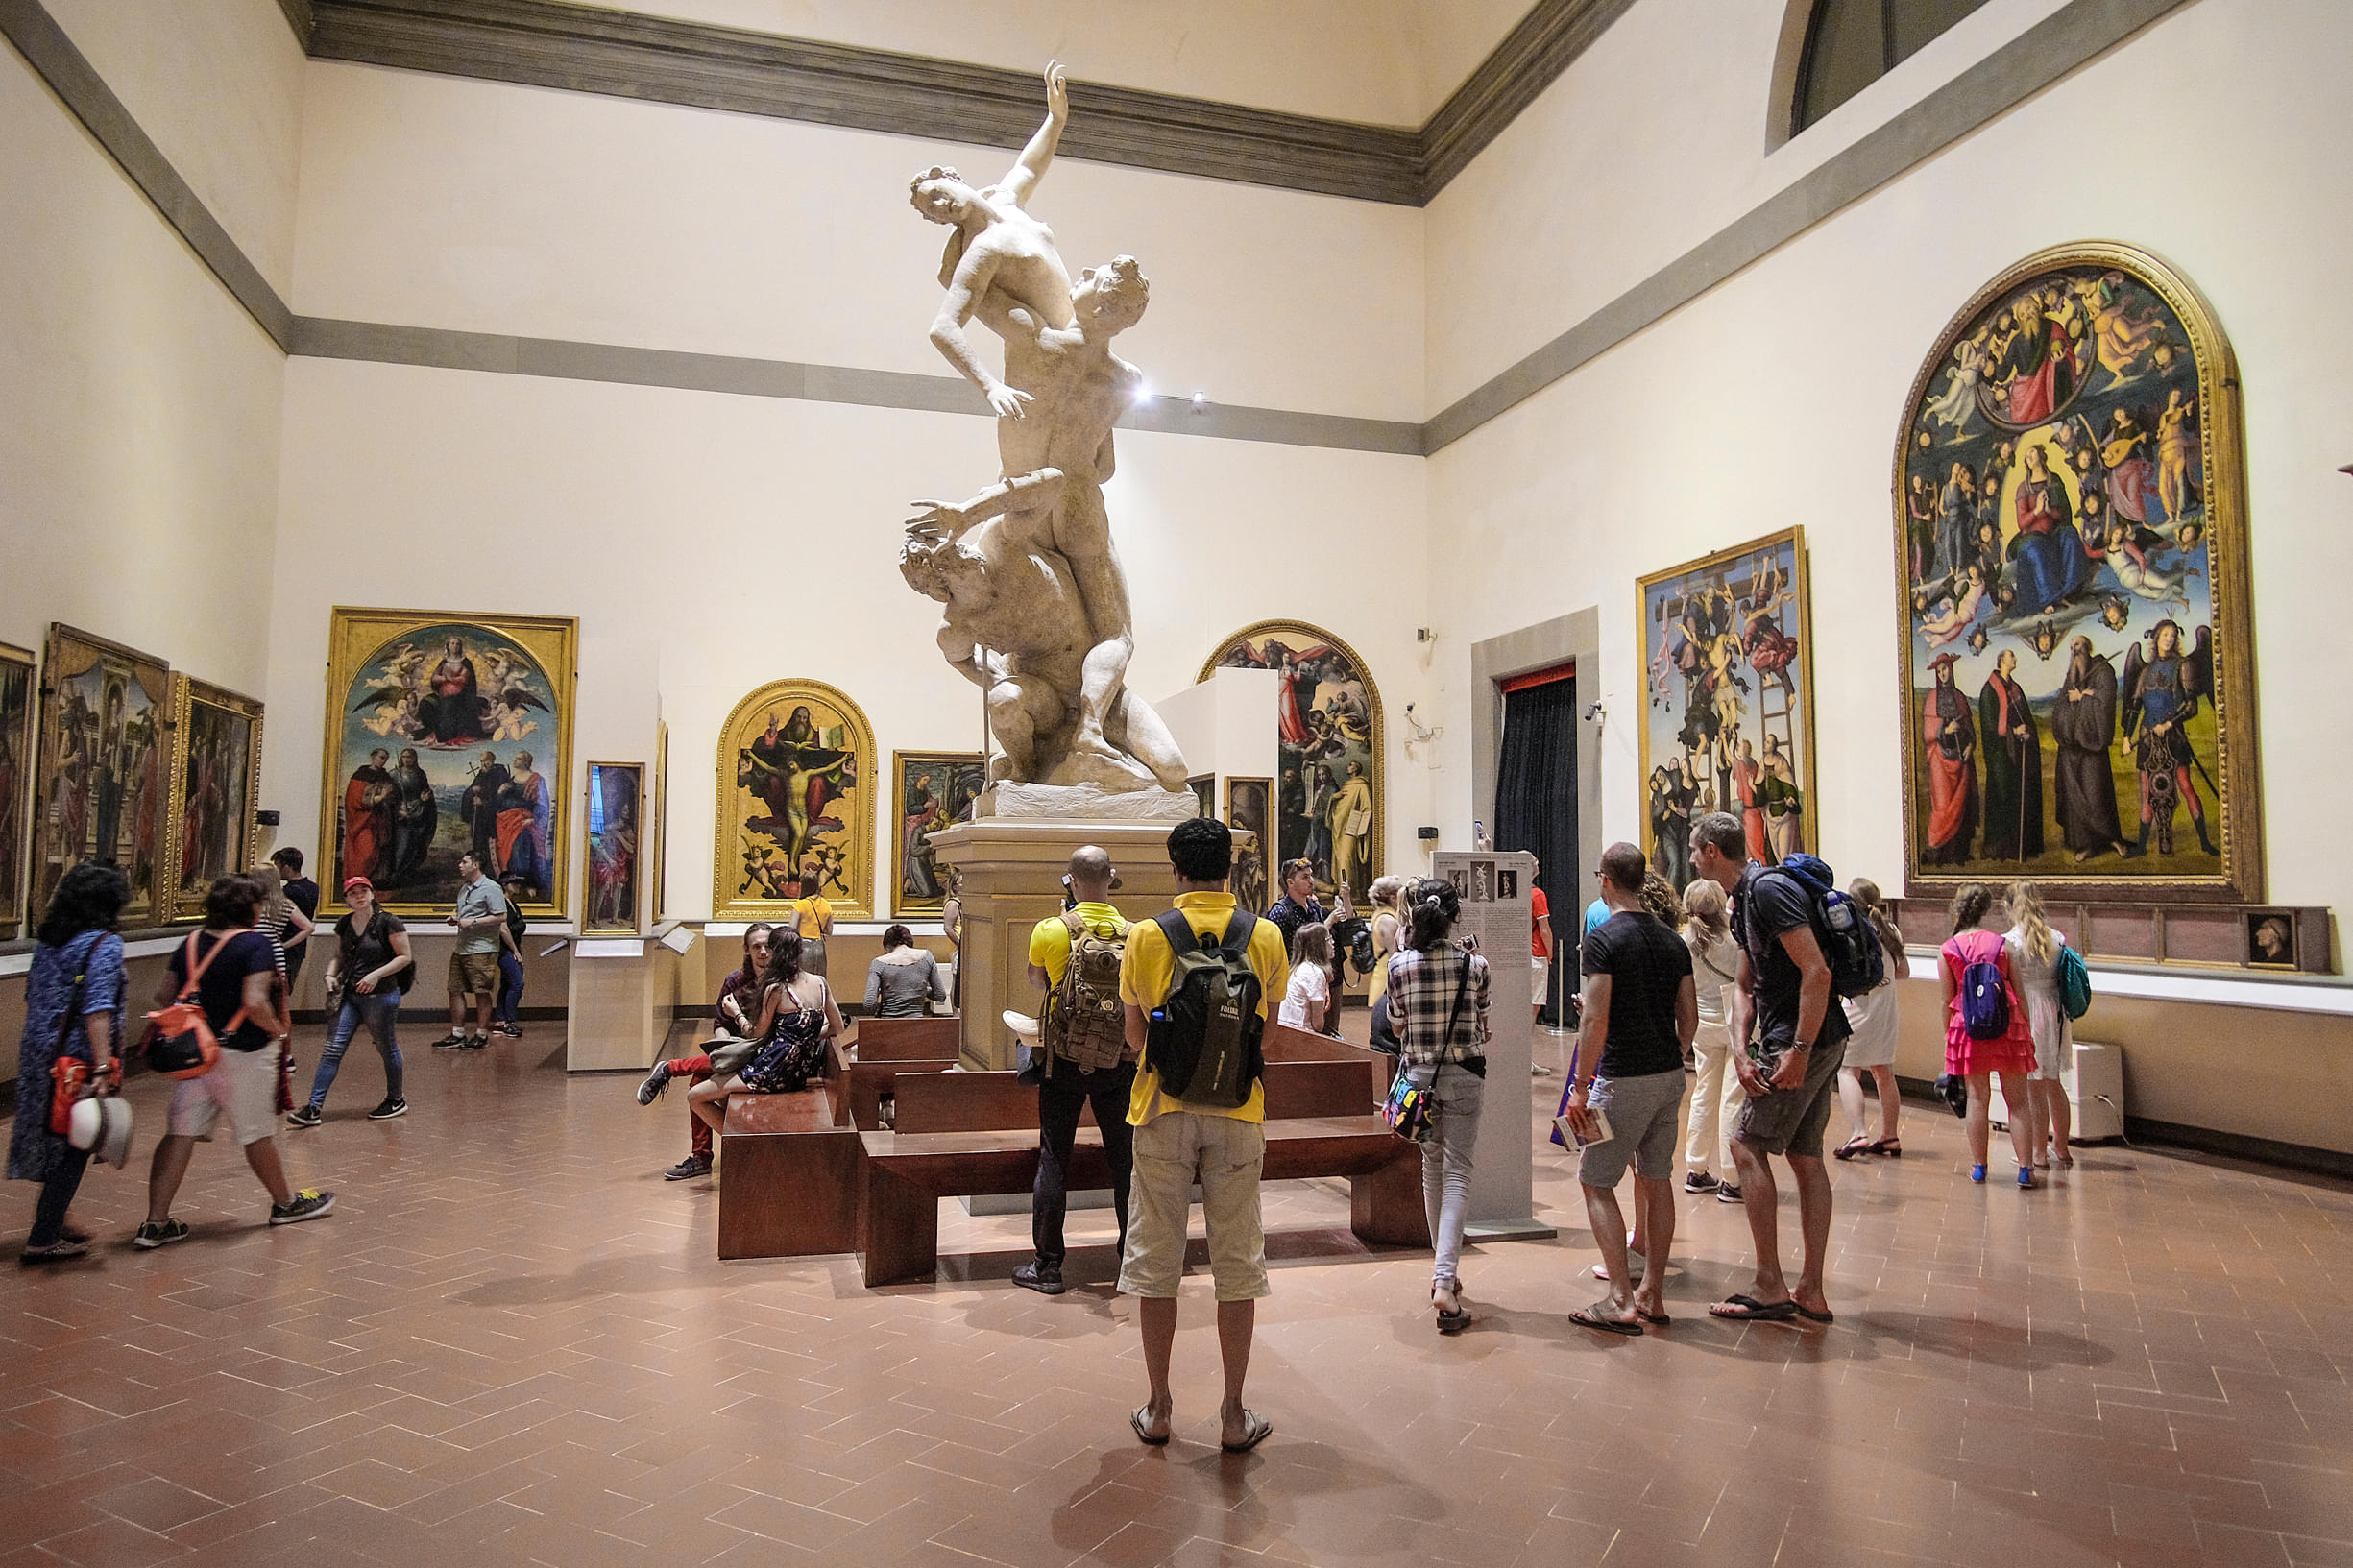 How to reach Accademia Gallery